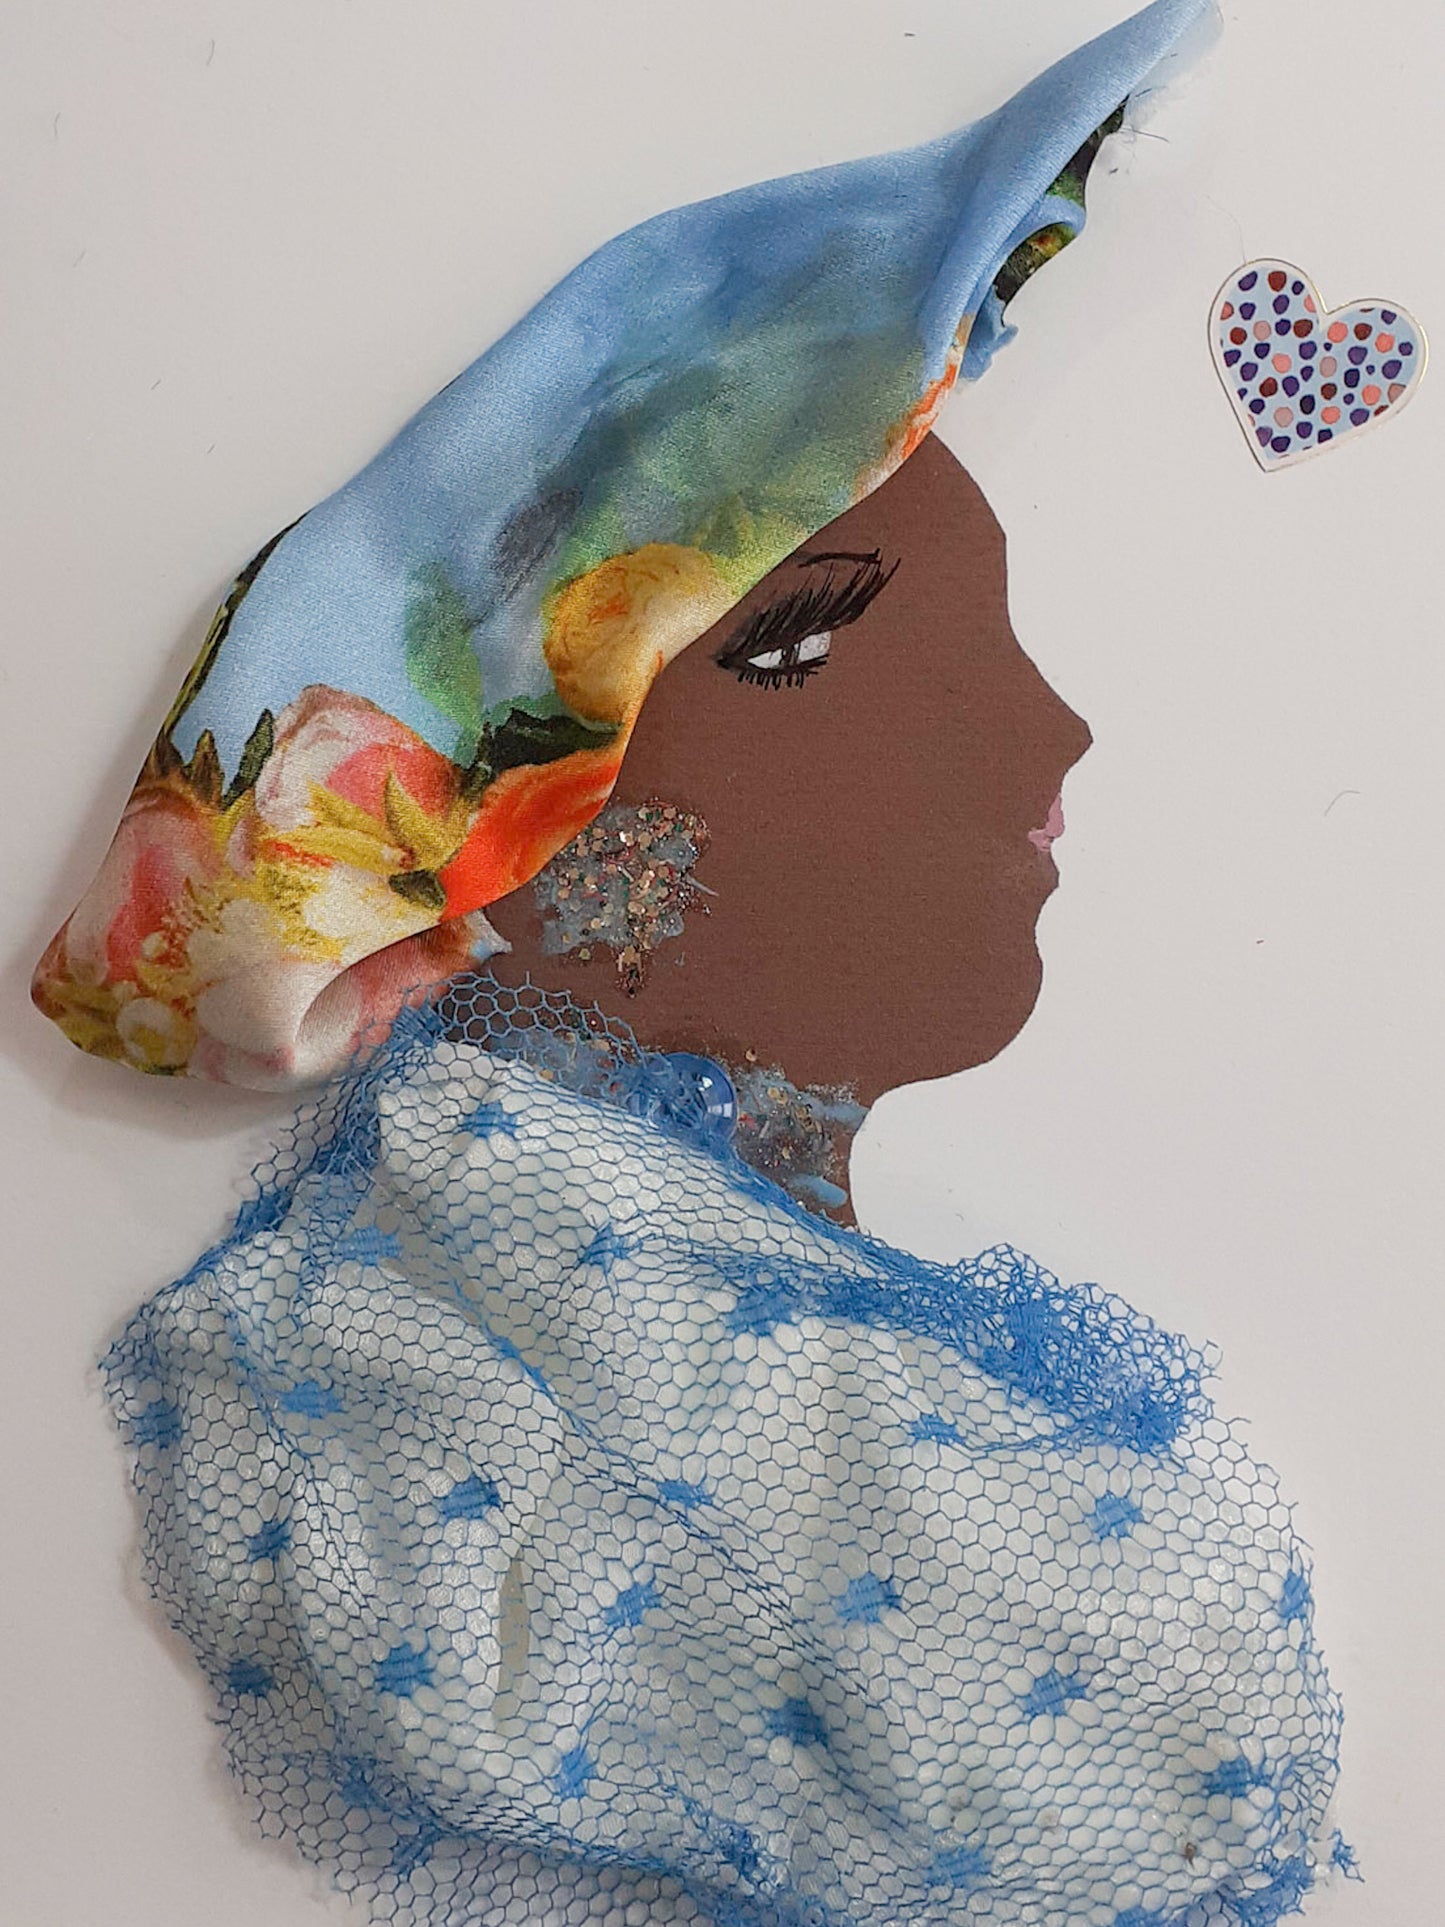 This card has been given the name Bethnal Green Princess. Bethnal wears a white blouse which has a light blue netted overlay, and a floral patterned silk scarf around her head. Her jewellery is made up of blue and gold glitter. 